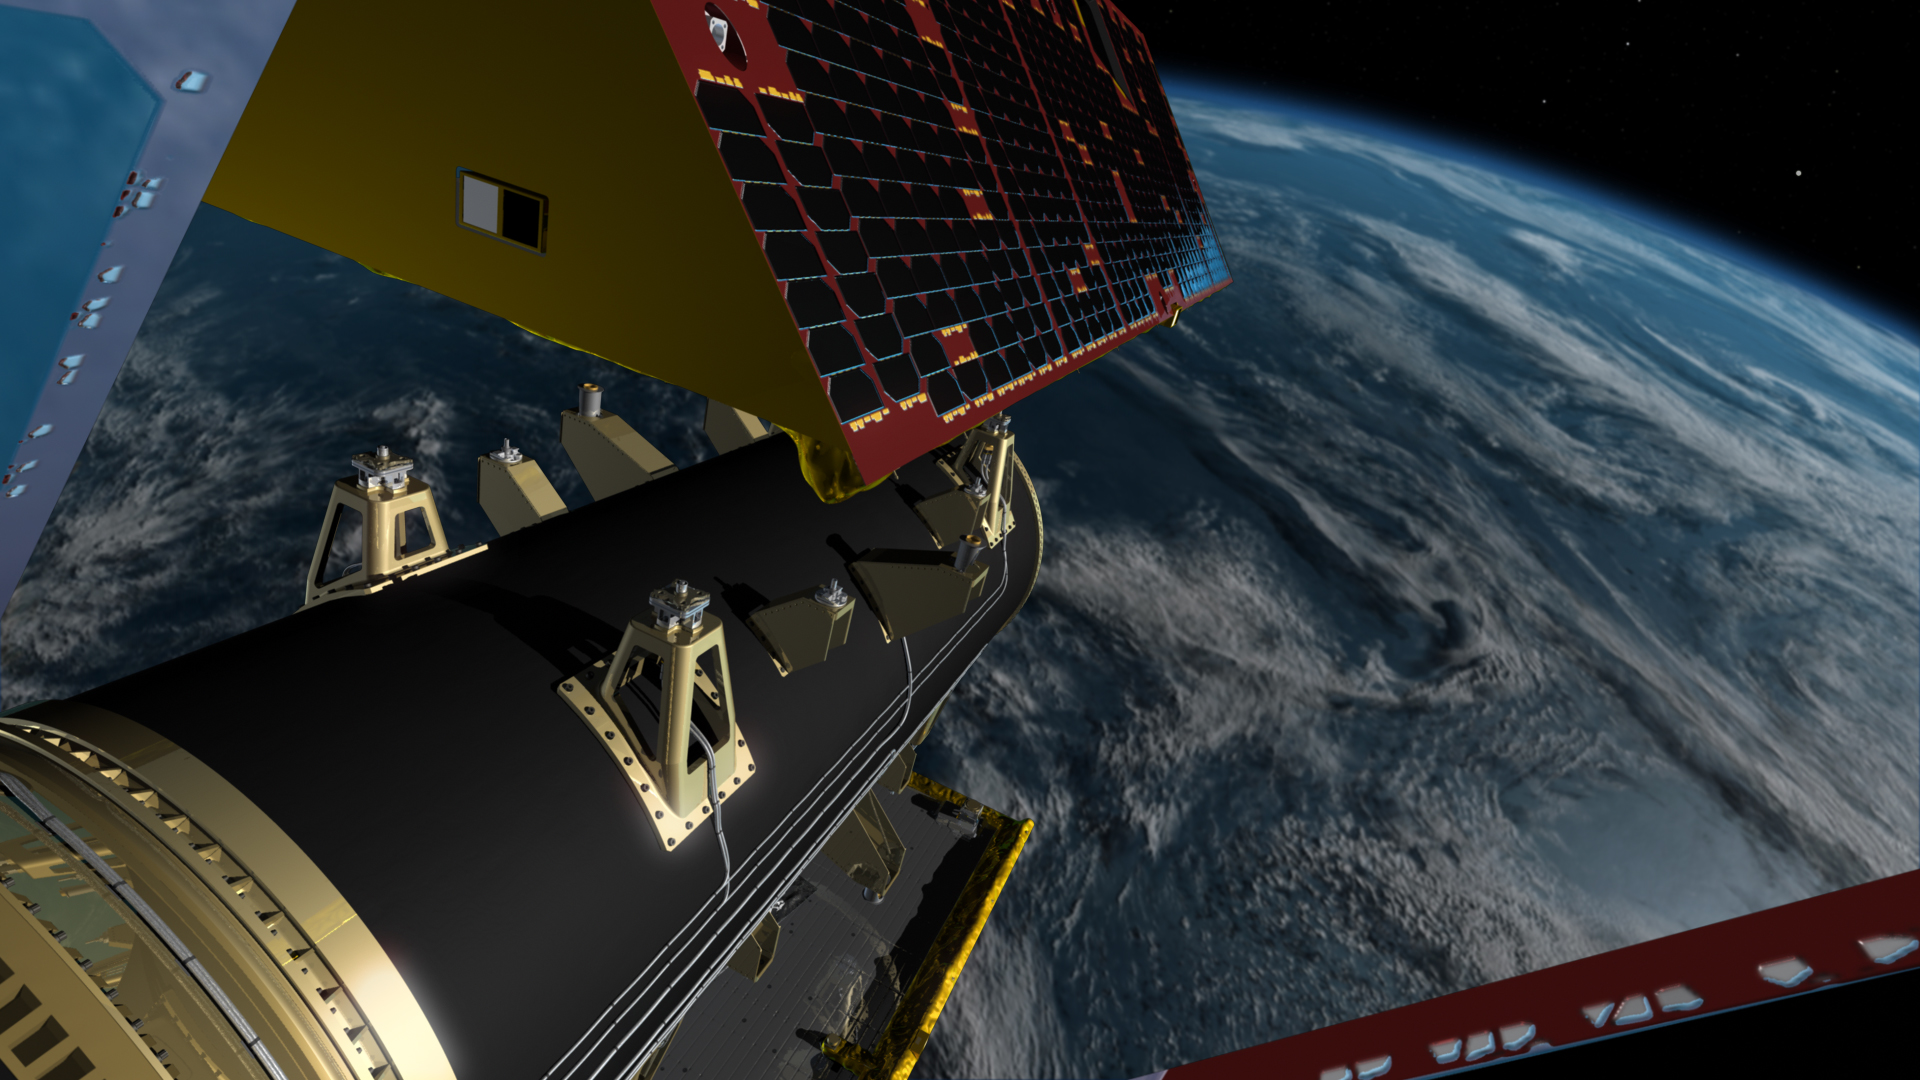 One of the GRACE-FO satellites separates from a spacecraft dispenser over Earth